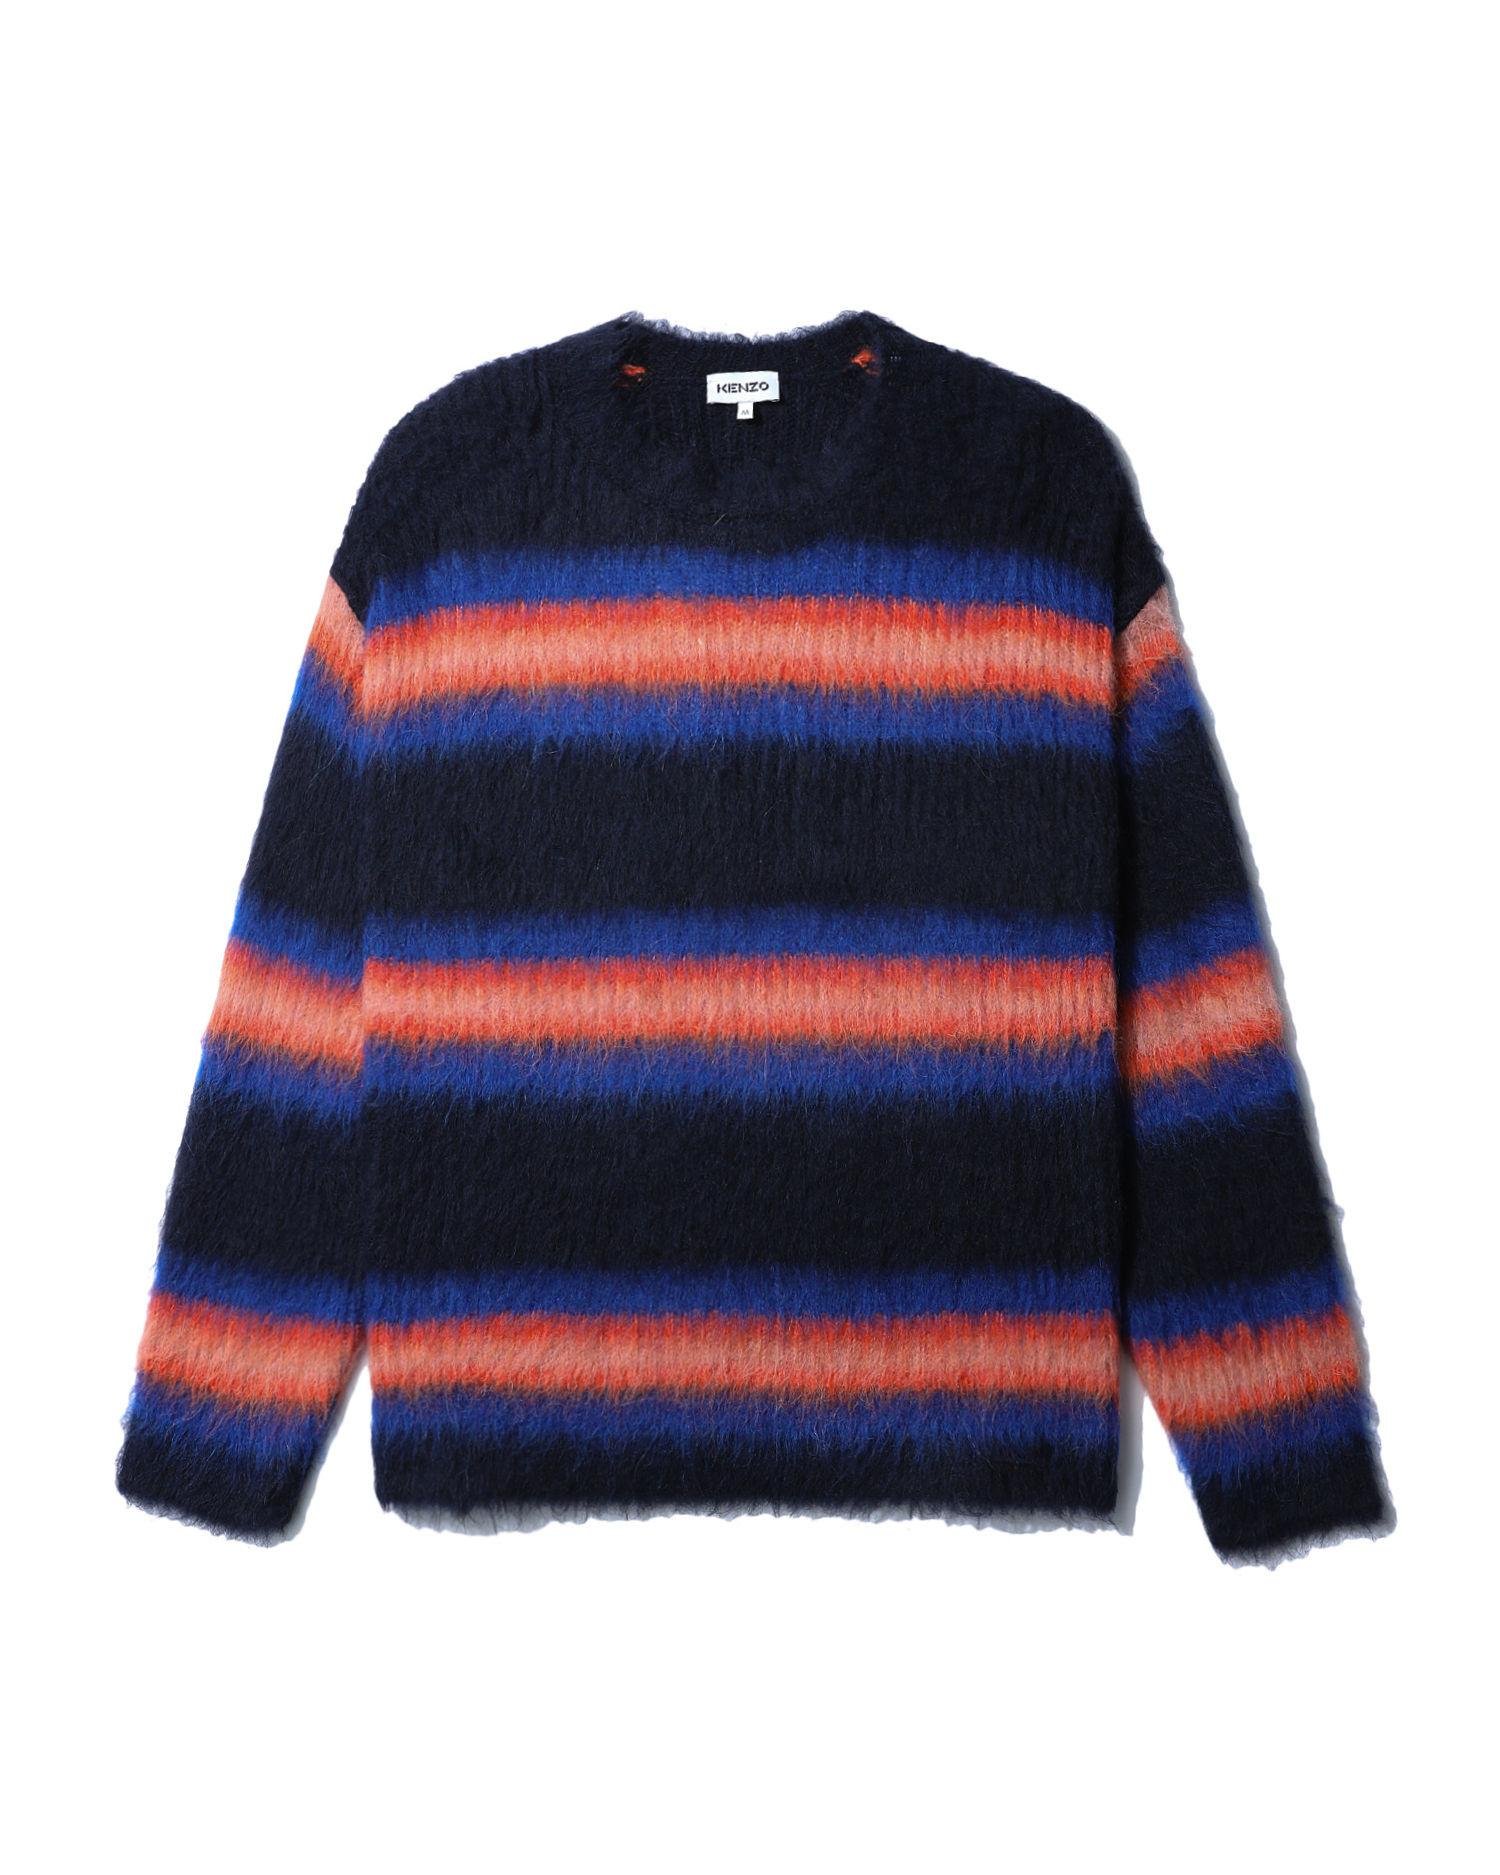 Striped comfort sweater by KENZO